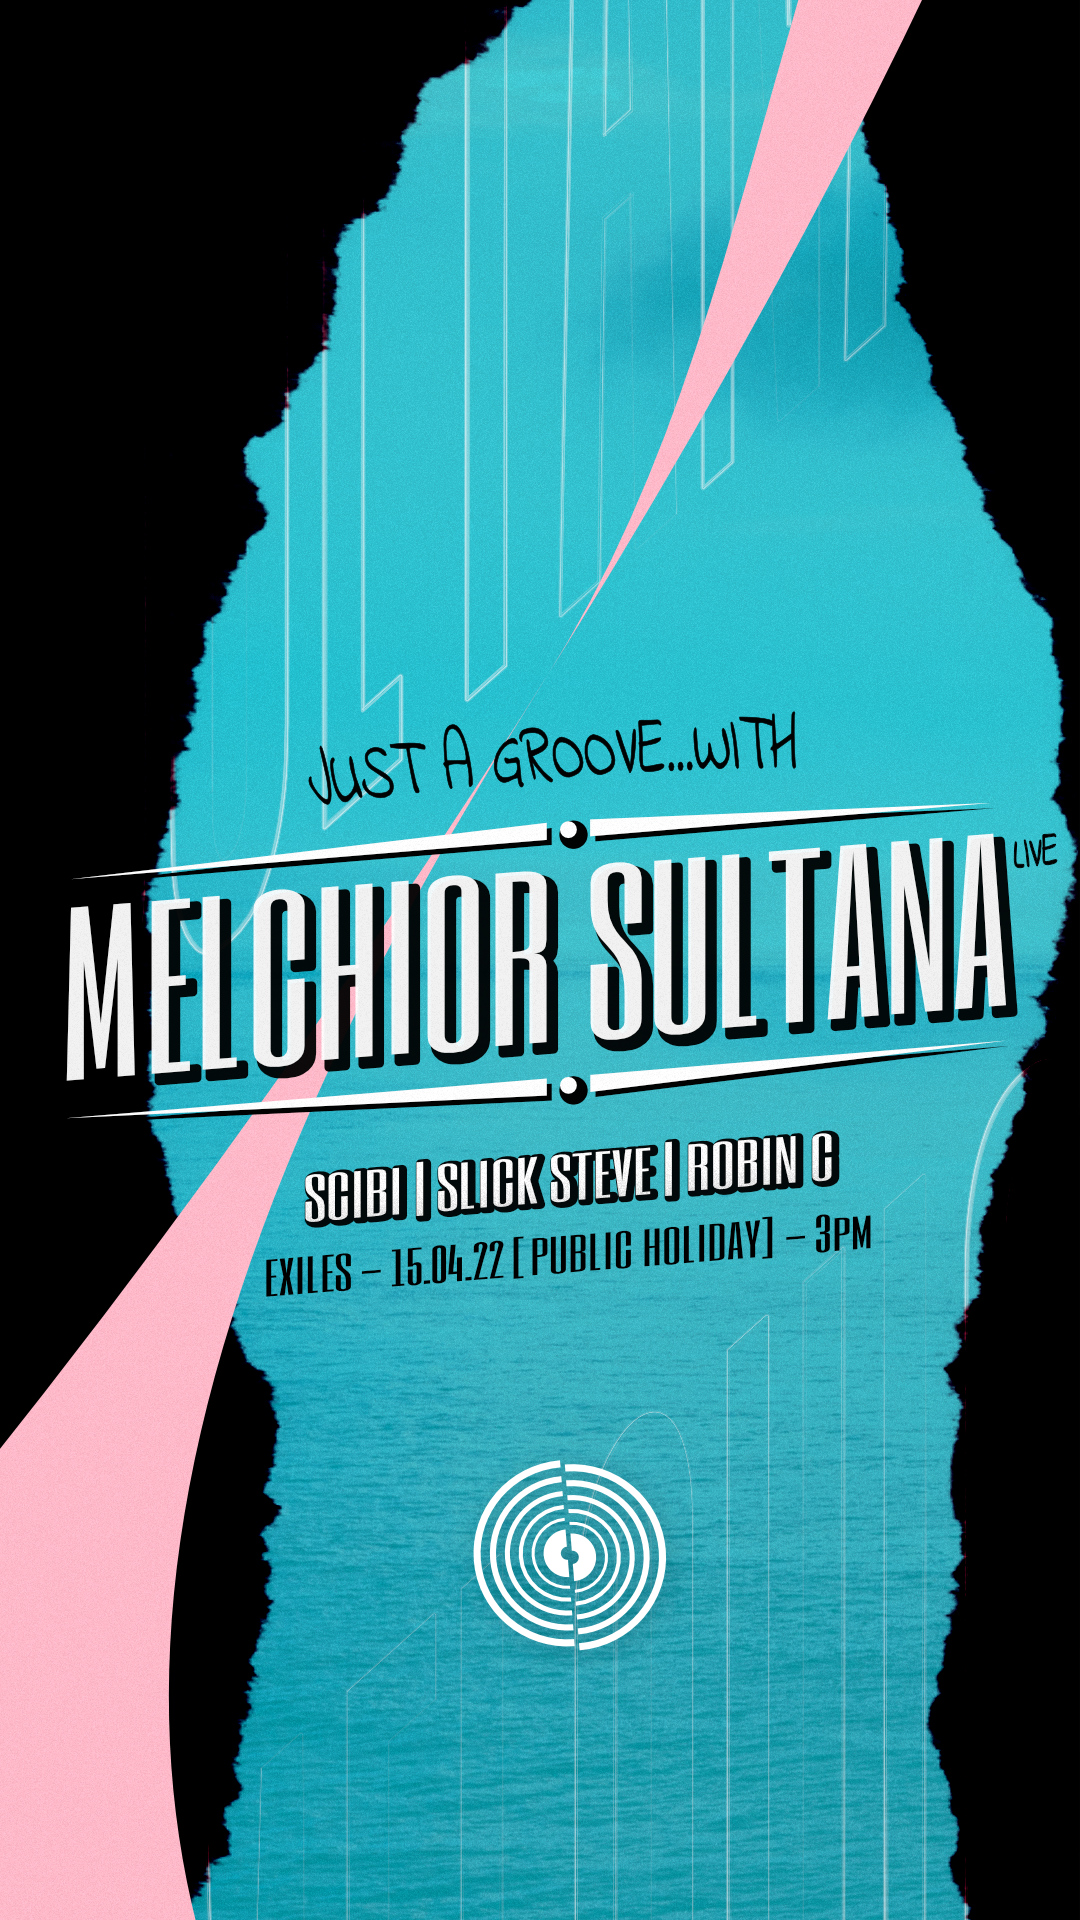 Just a Groove...with Melchior Sultana [LIVE] poster